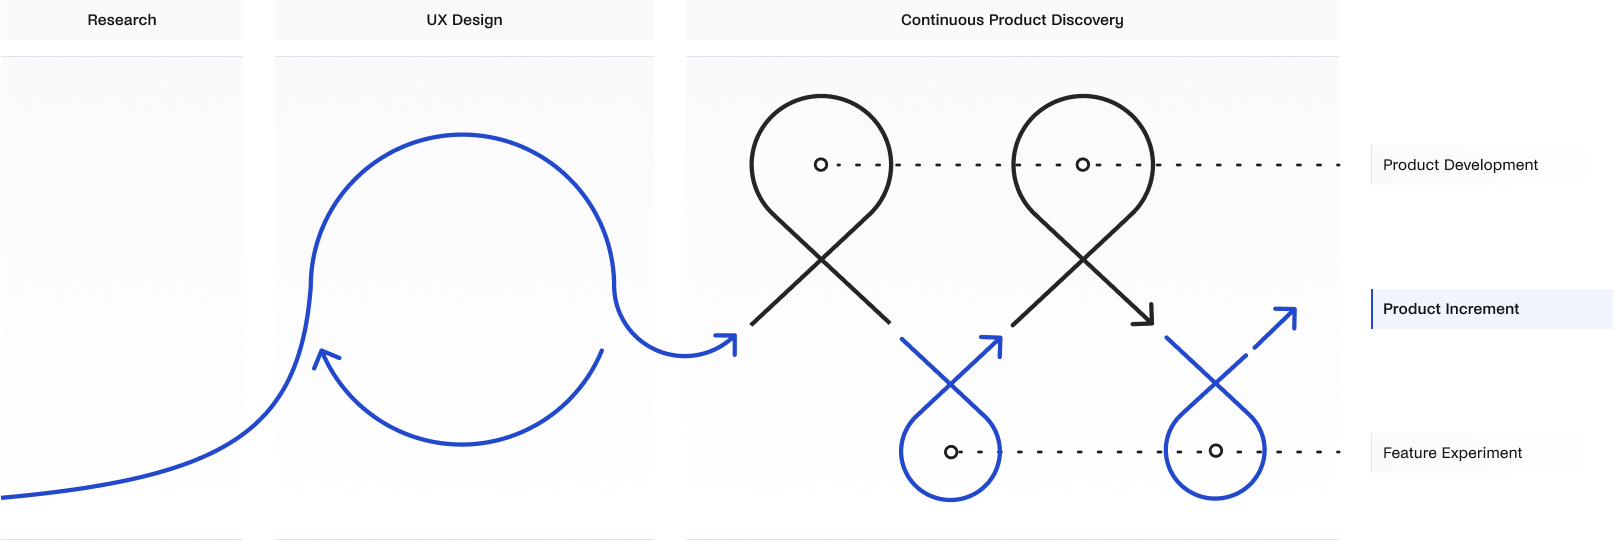 Continuous Product Discovery graph  